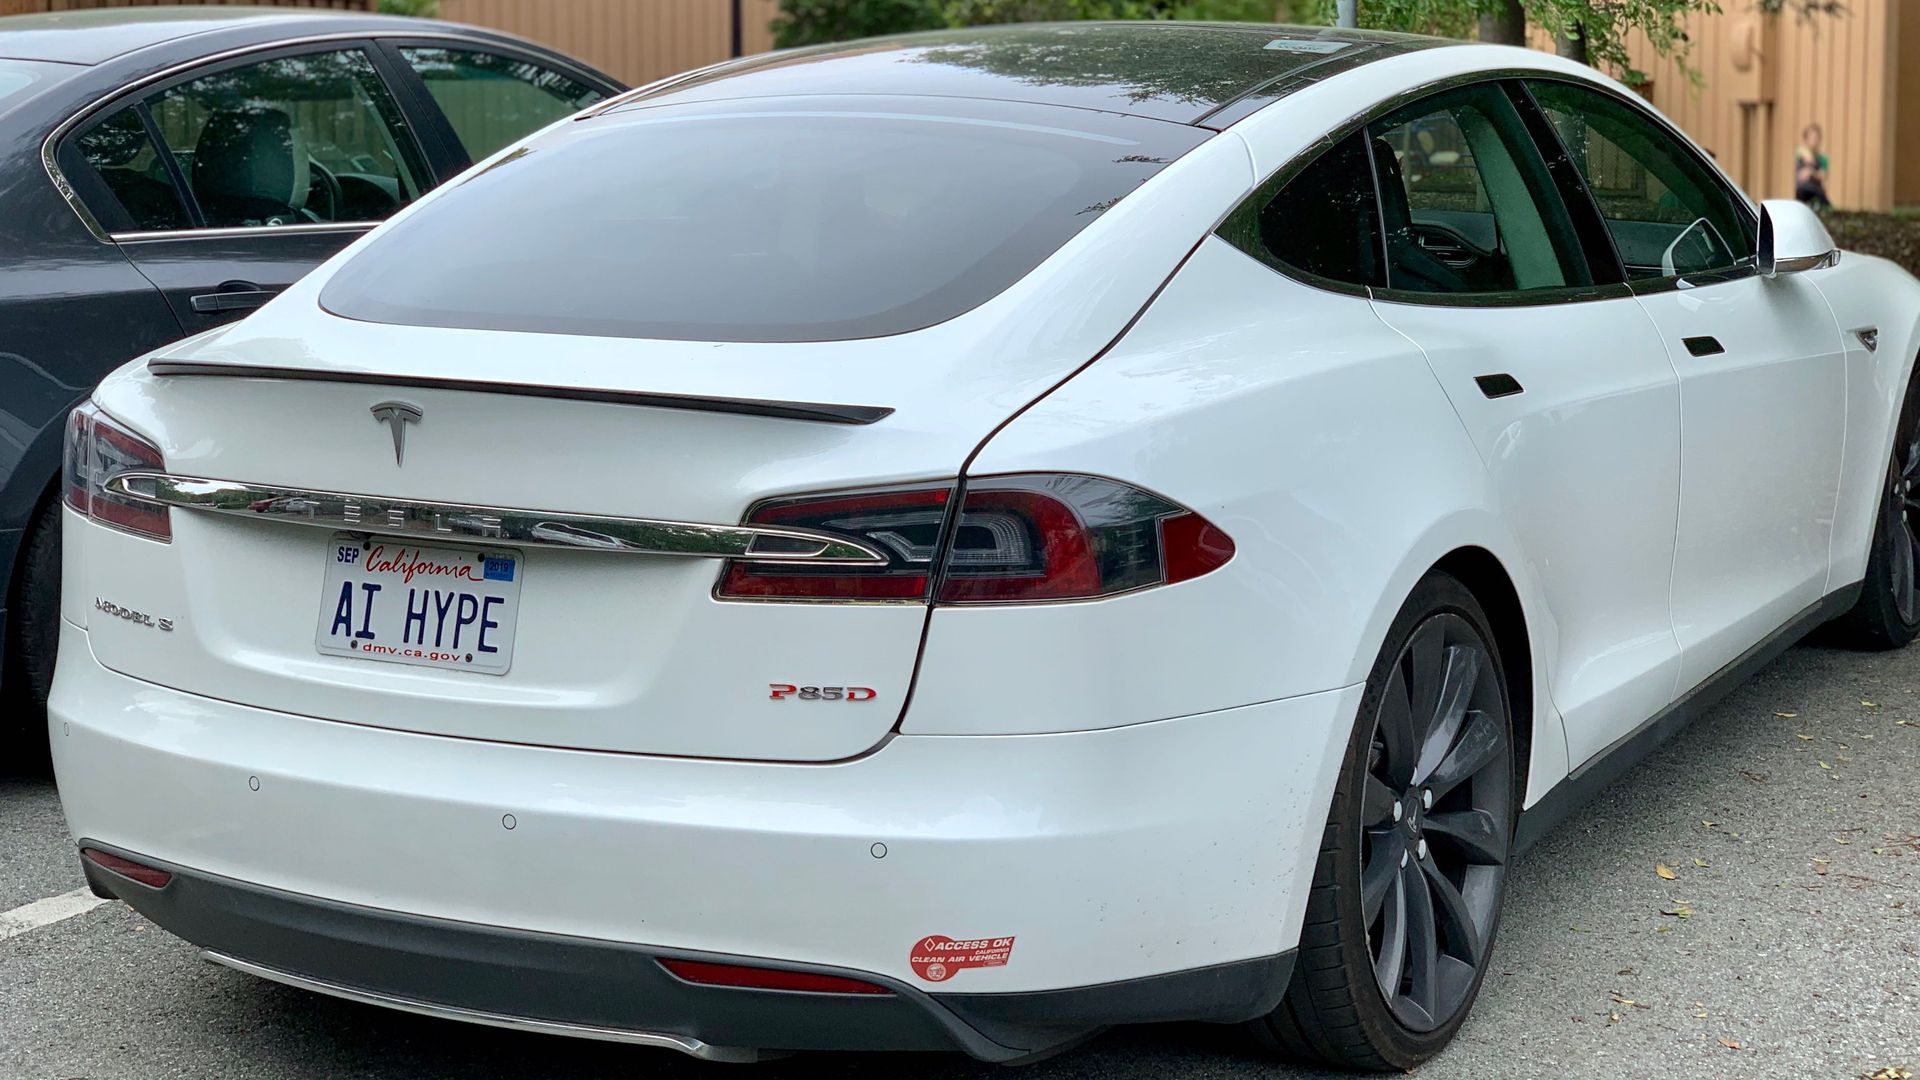 Image of a Tesla Model S with a license plate that reads: "AI HYPE"